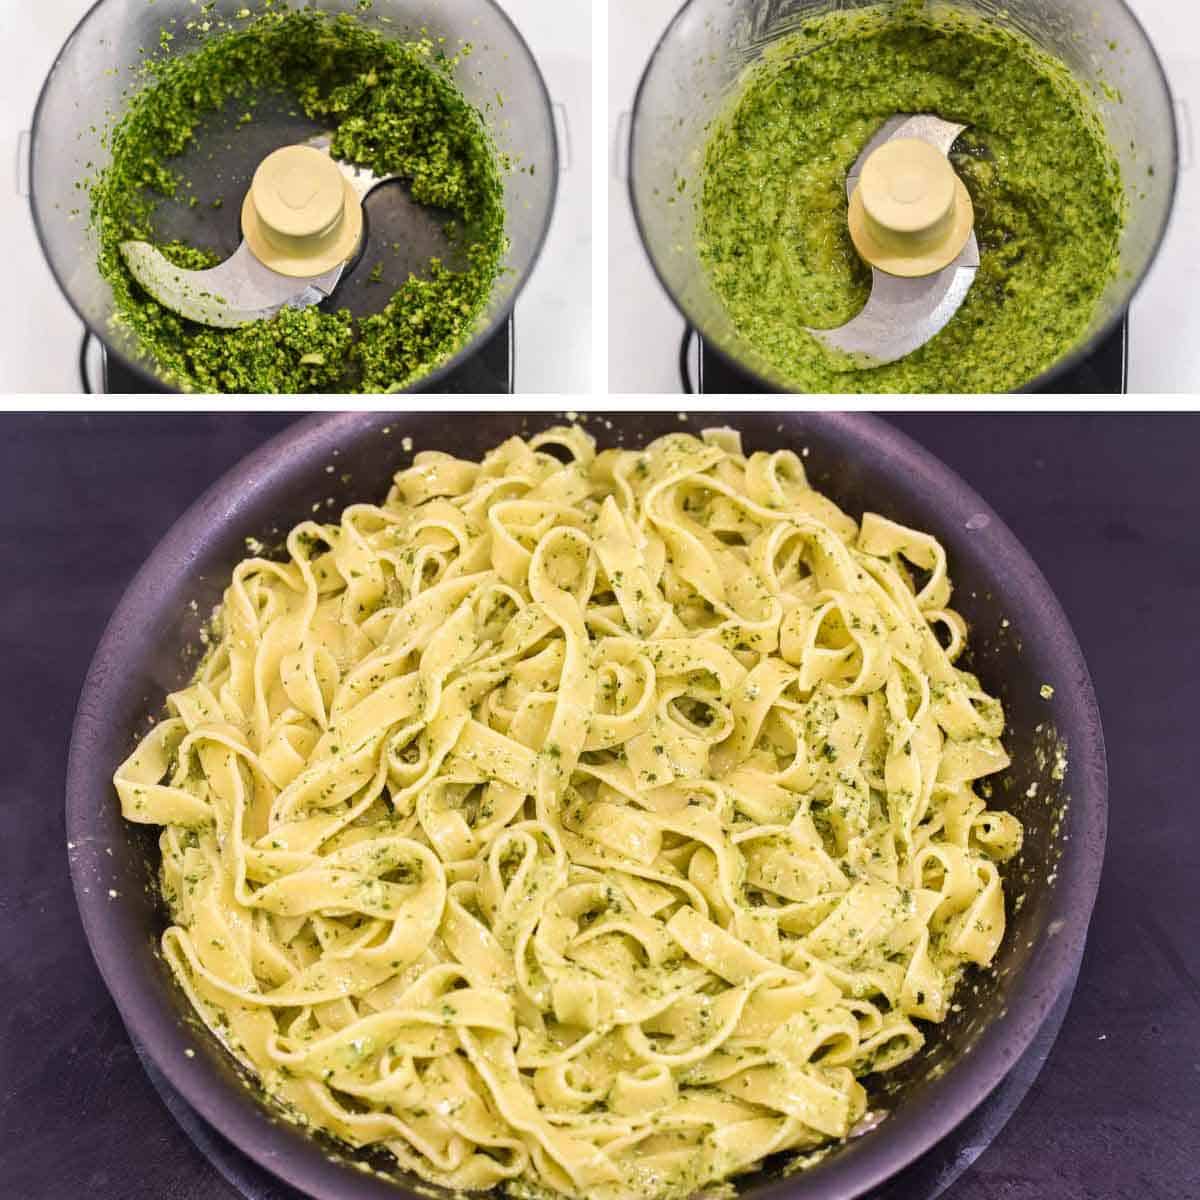 process shots of making pesto and tossing the pasta in it